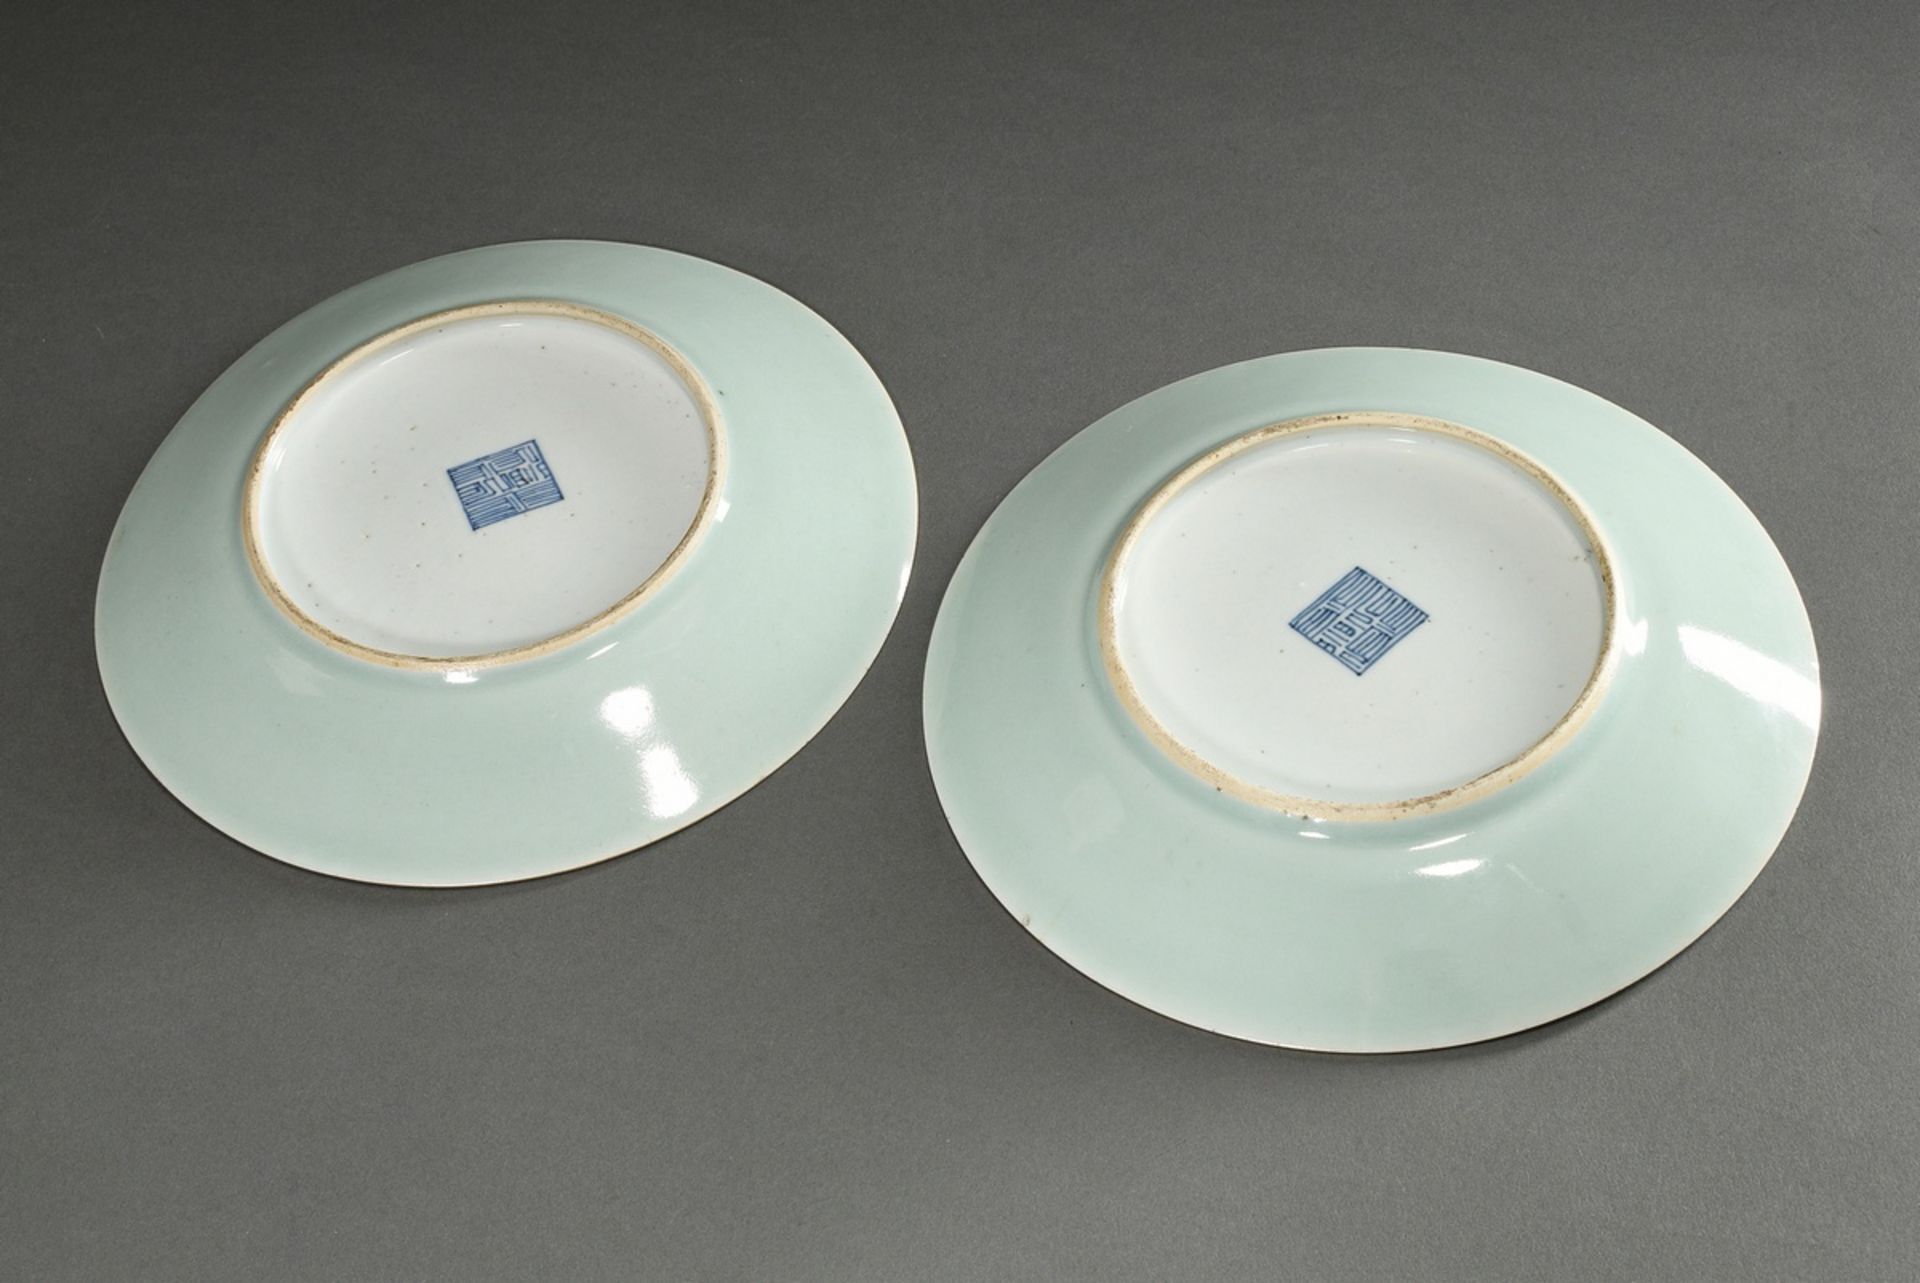 Pair of porcelain plates with polychrome enamel painting "Birds and Butterflies" on a delicate cela - Image 5 of 8